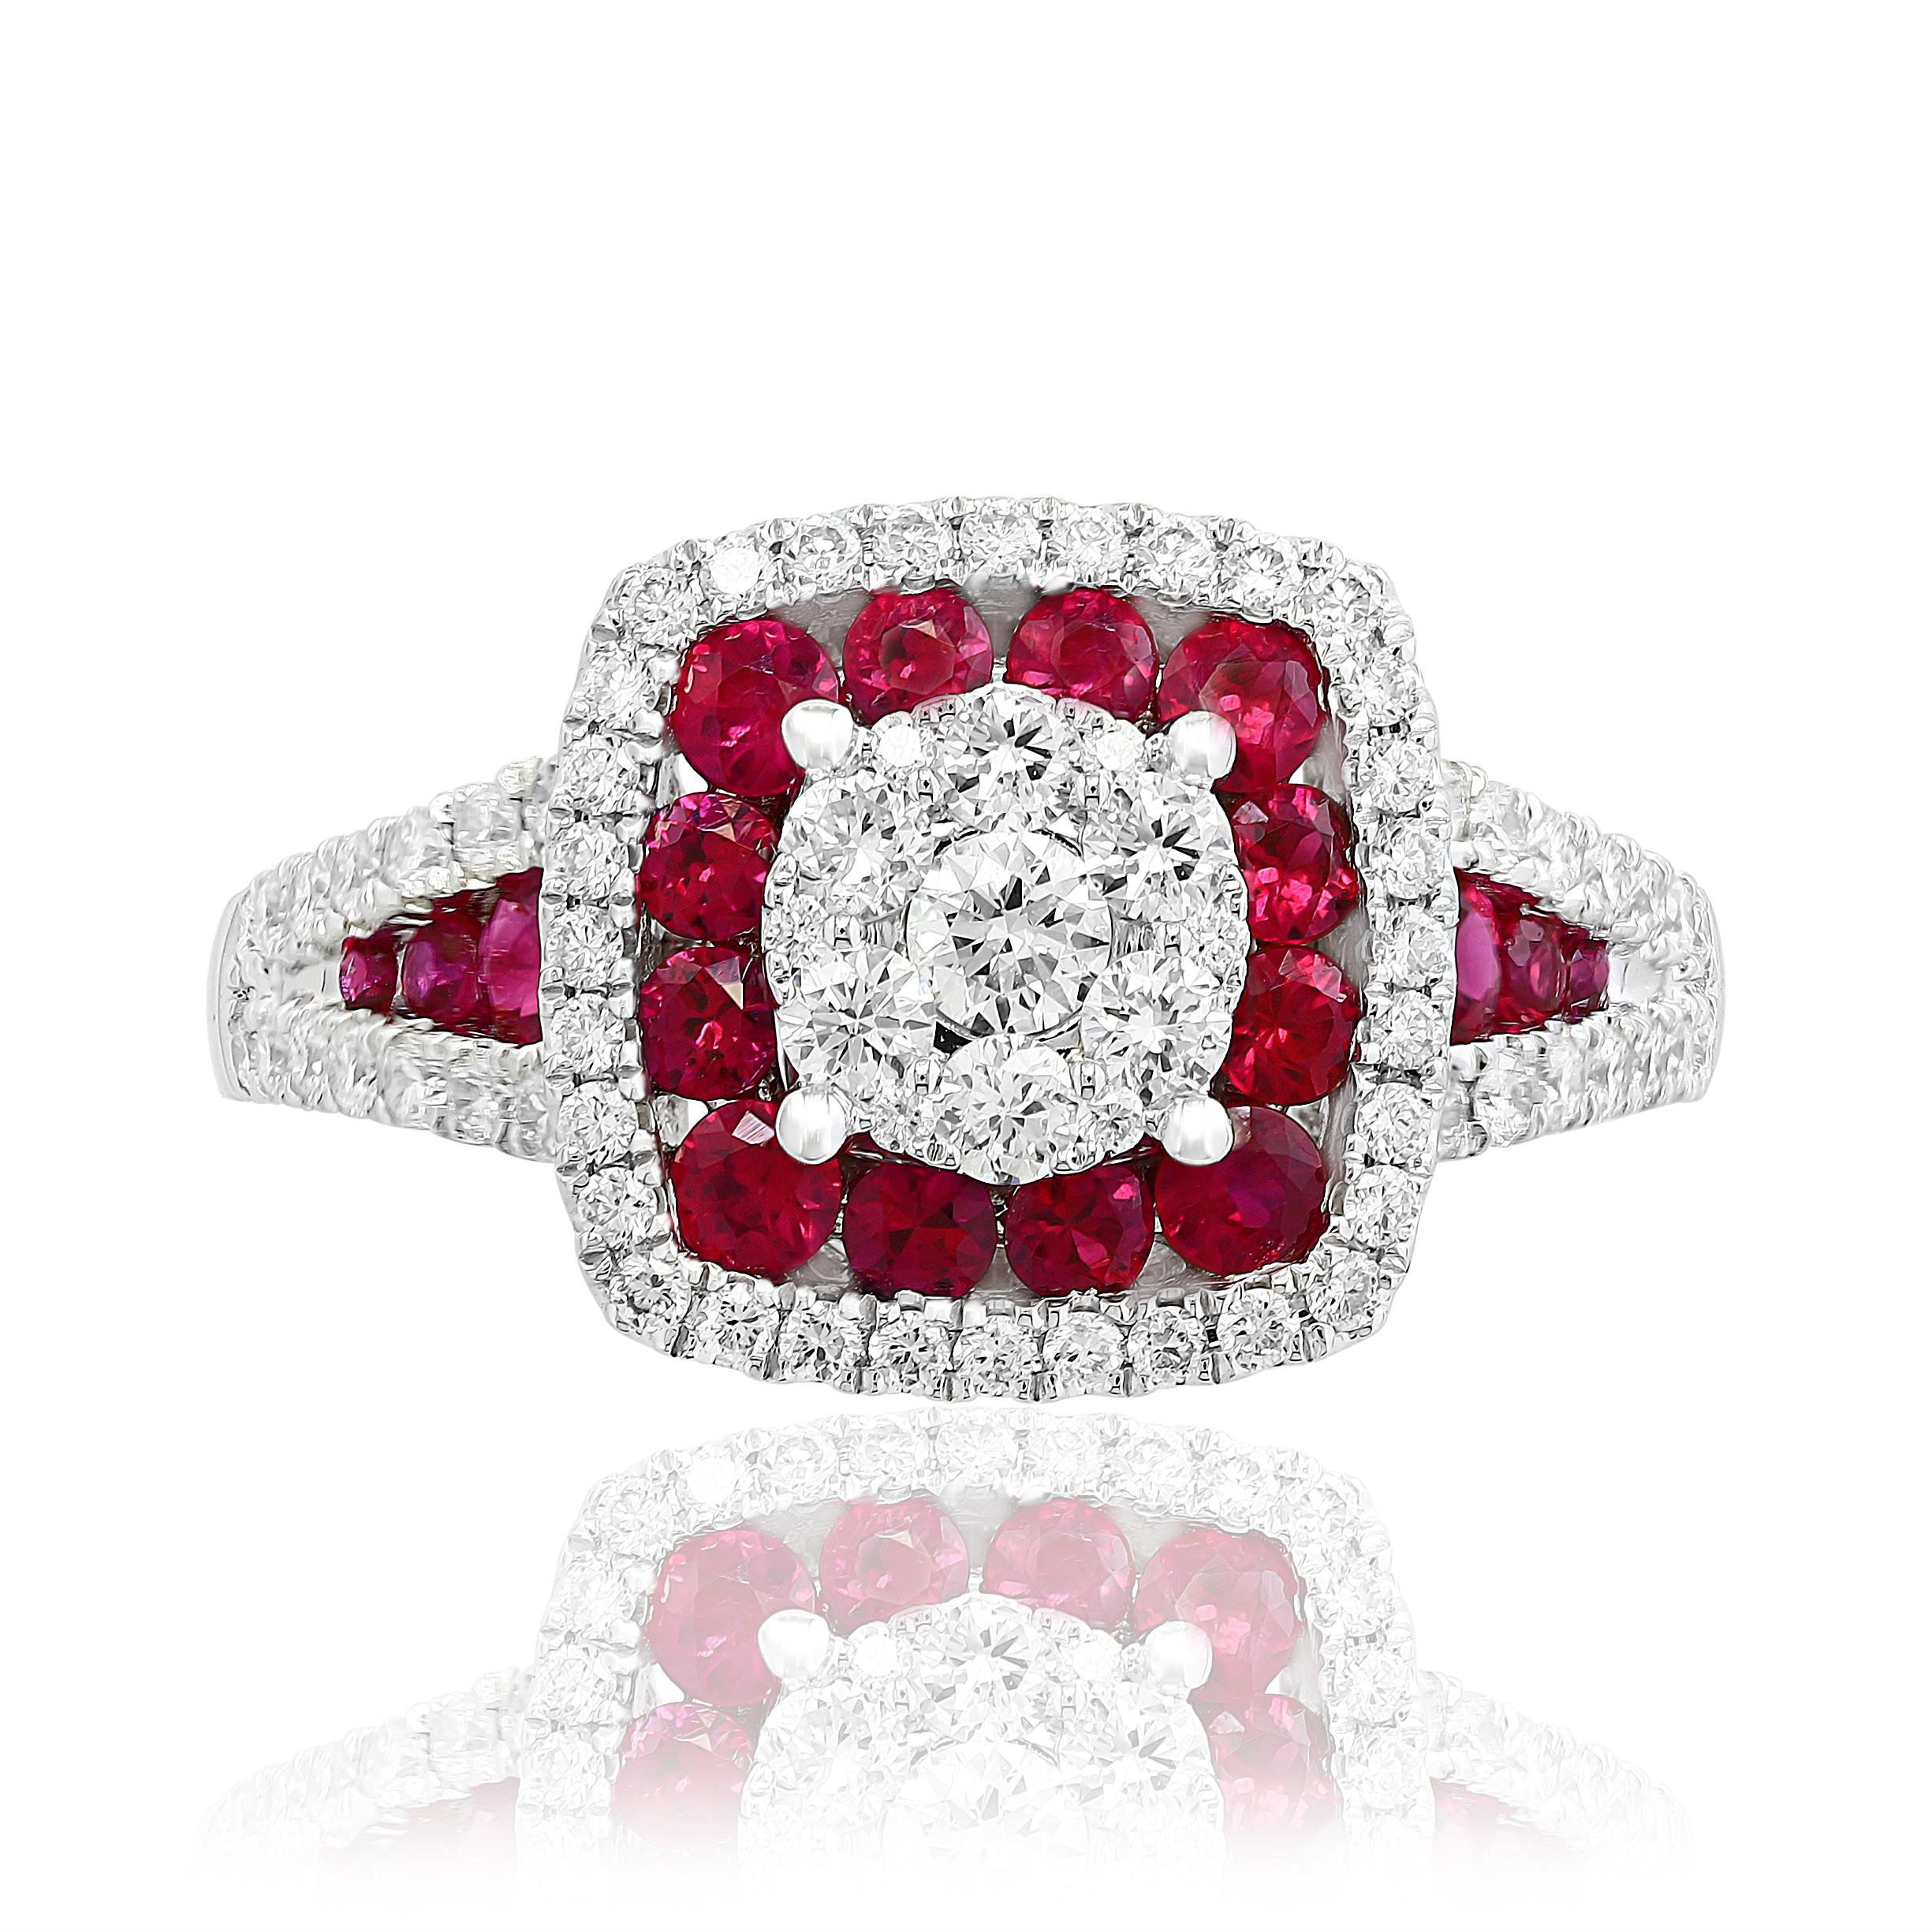 A unique and stylish ring showcasing a cluster of round diamonds in the center surrounded by a row of rubies and another row of diamonds. 18 Rubies weigh 0.76 carat and 73 diamonds weigh 0.70 carat in total.  Made in 14k white gold. Size 6.5 US